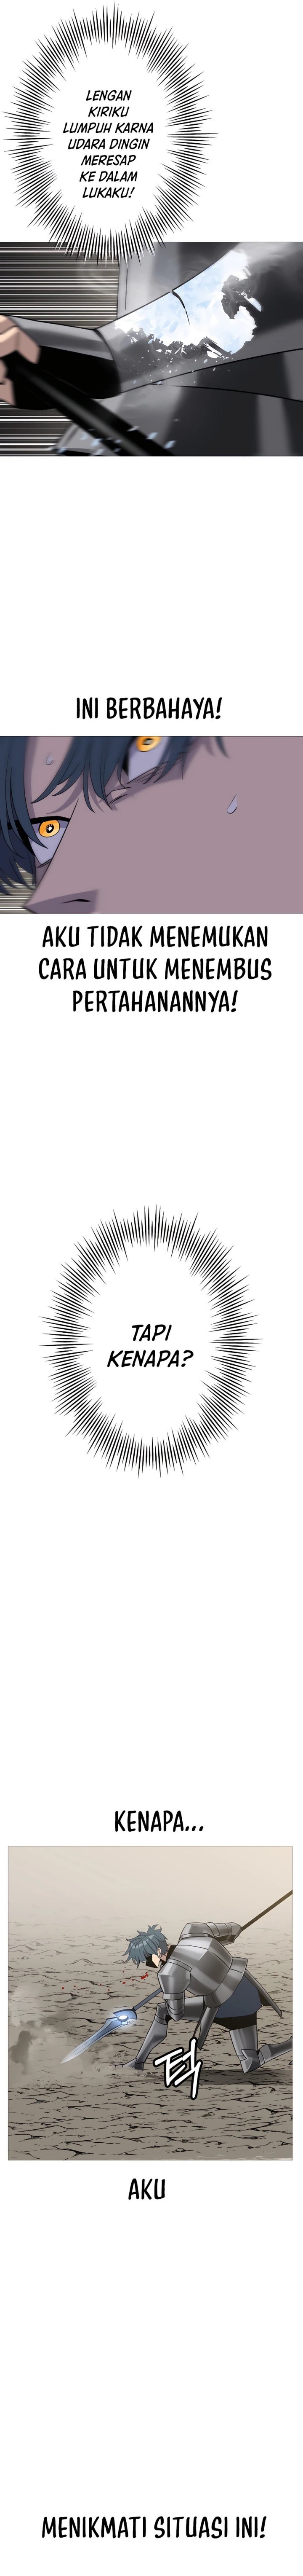 Dilarang COPAS - situs resmi www.mangacanblog.com - Komik the story of a low rank soldier becoming a monarch 093 - chapter 93 94 Indonesia the story of a low rank soldier becoming a monarch 093 - chapter 93 Terbaru 9|Baca Manga Komik Indonesia|Mangacan